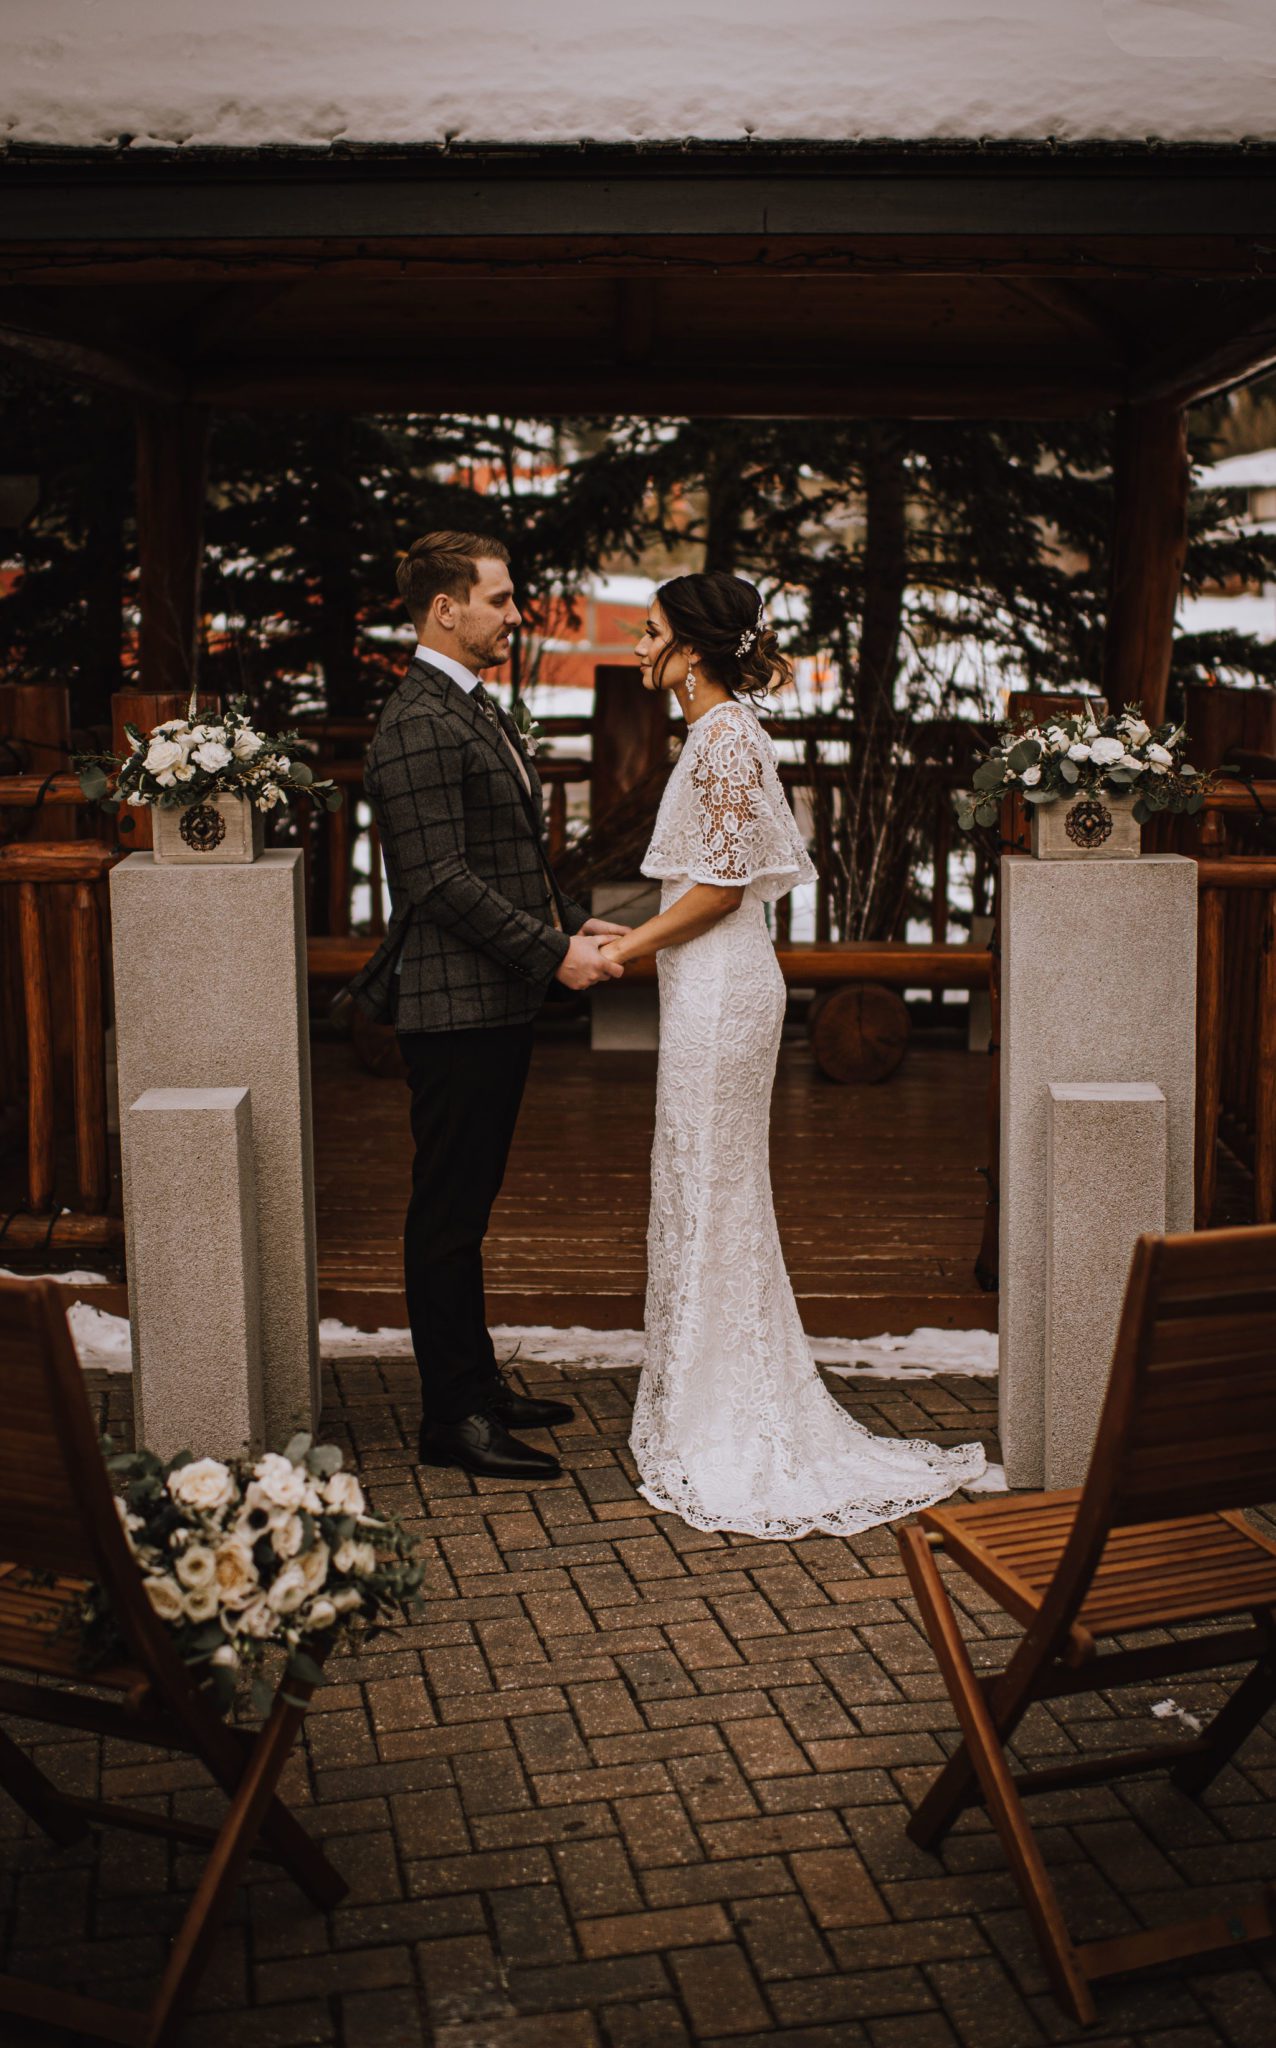 Intimate winter wedding ceremony at A Bear and Bison Inn